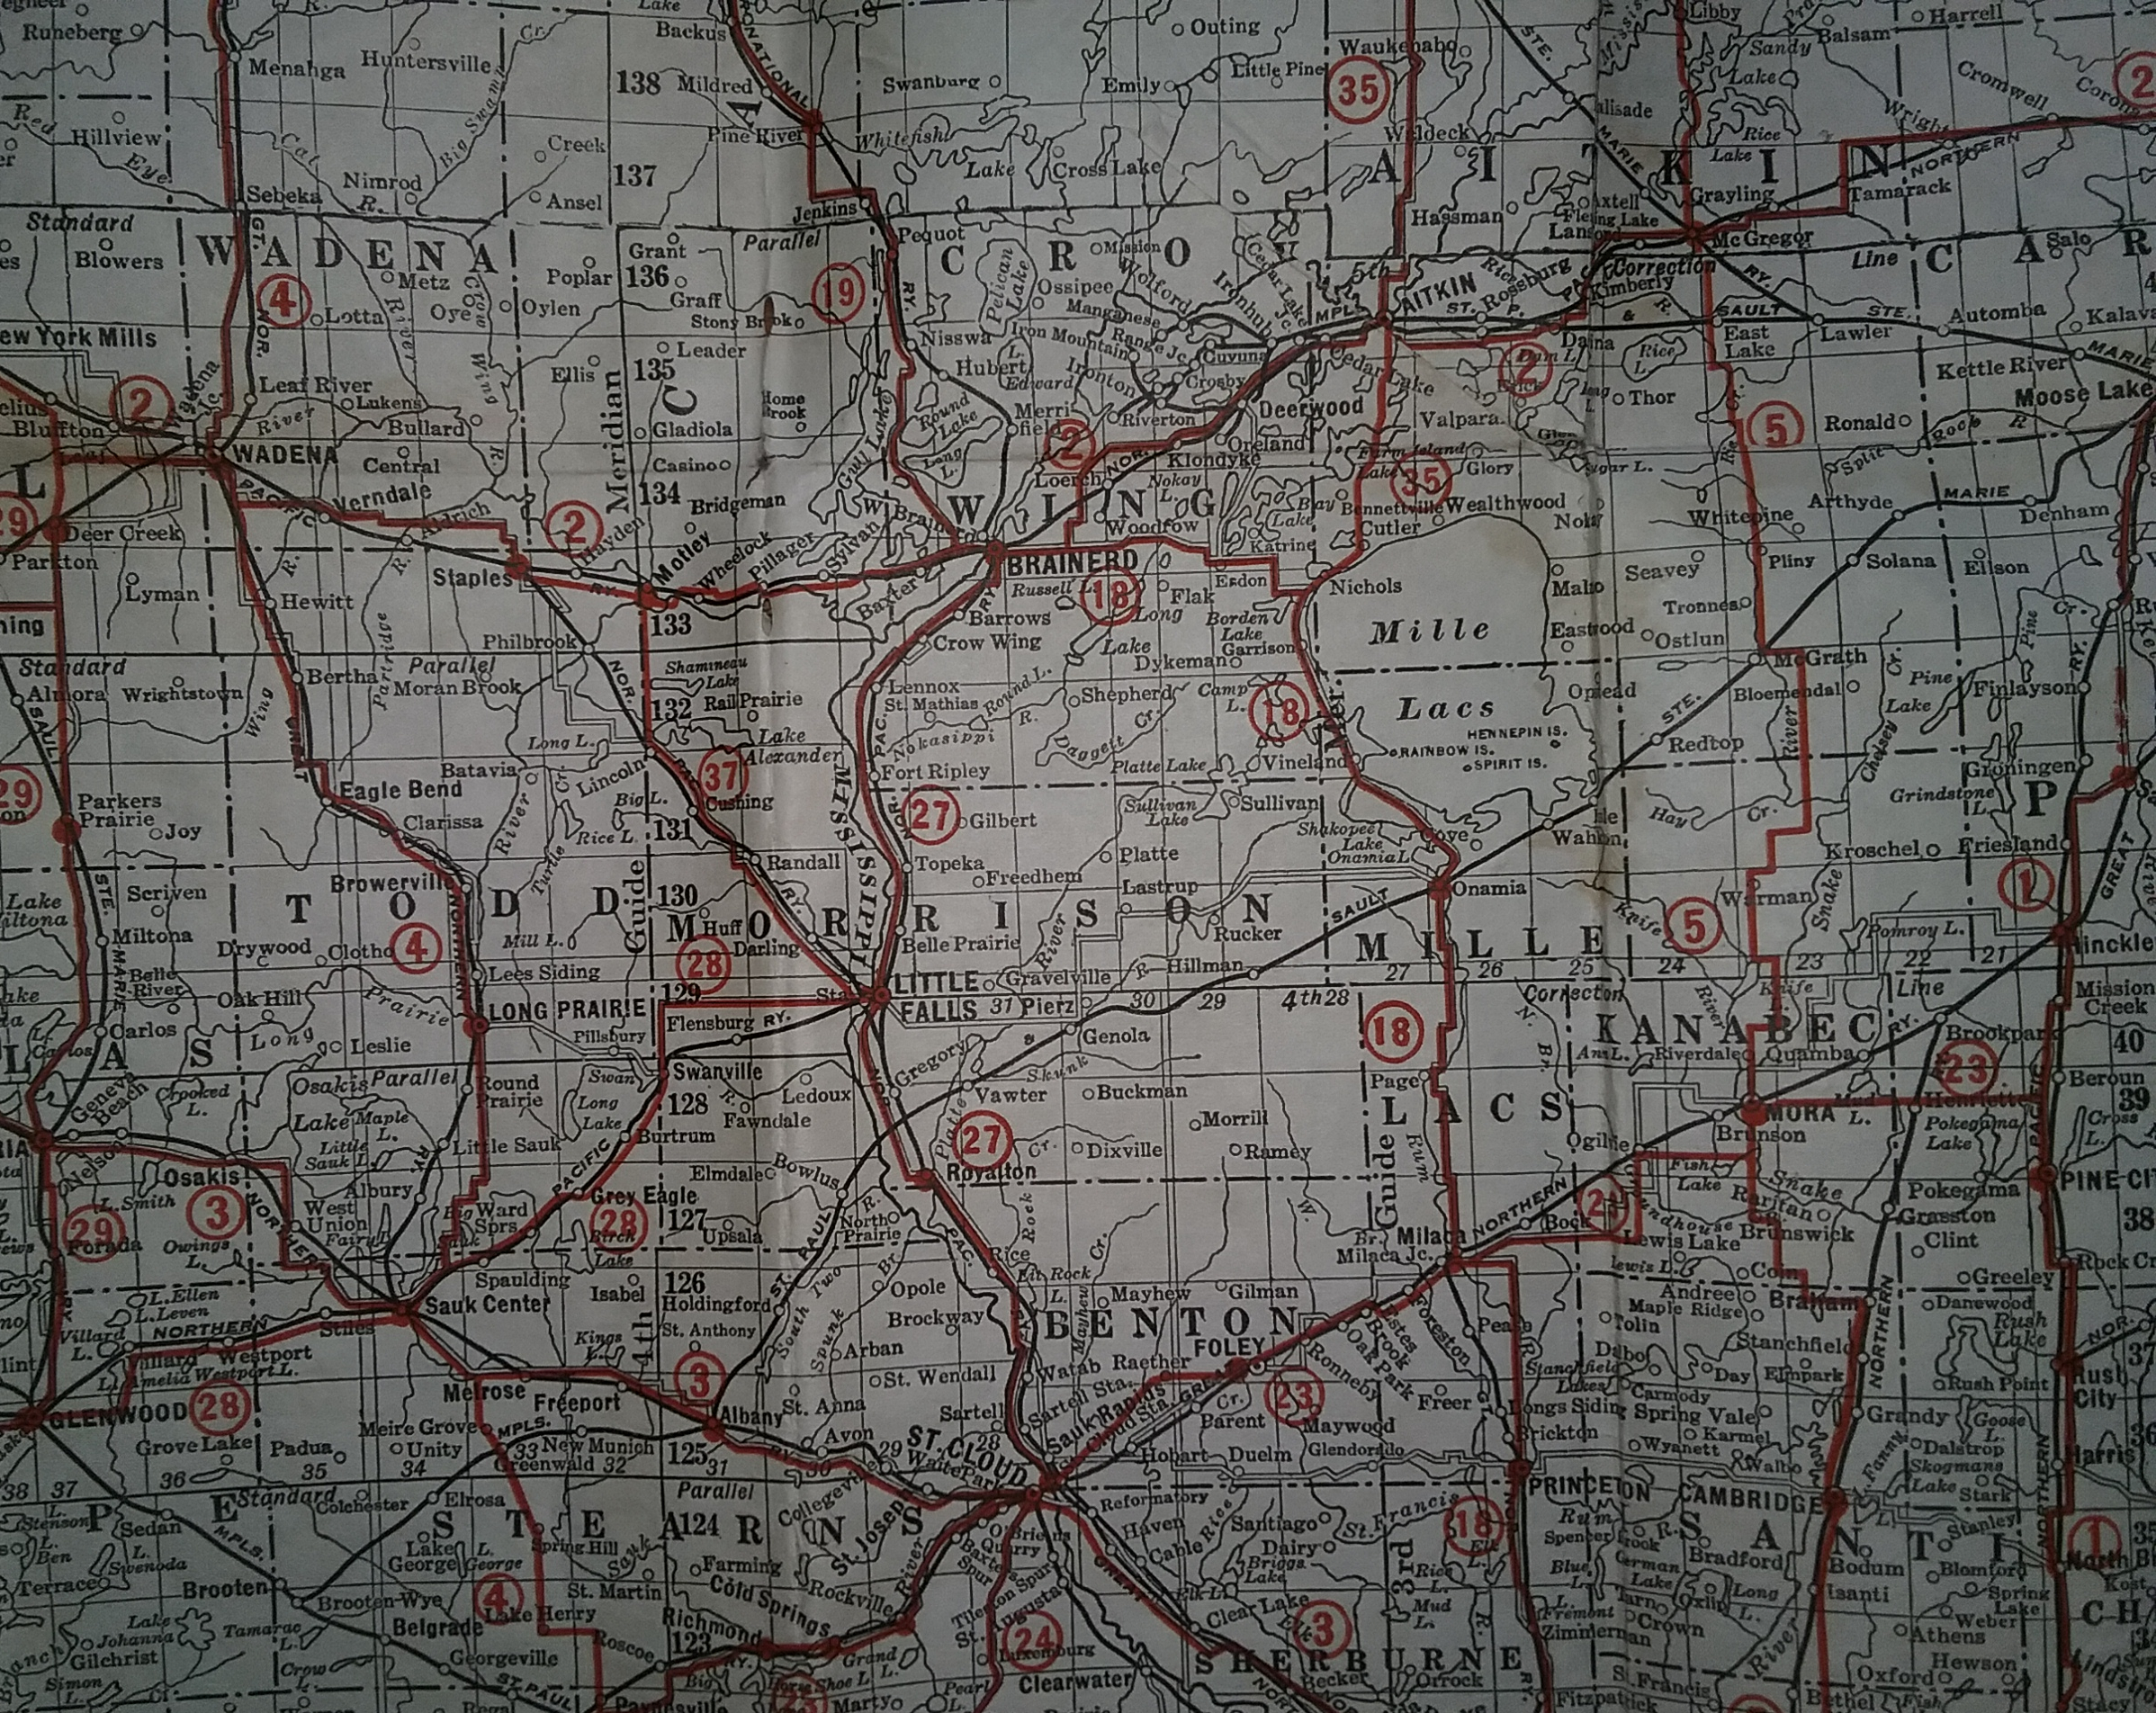 Morrison County section of "Babcock Plan for a Trunk Highway System in Minnesota," map published by the Minnesota Highway Improvement Association, St. Paul, MN, c. 1920. Mueller/Elvig collection at the Morrison County Historical Society.